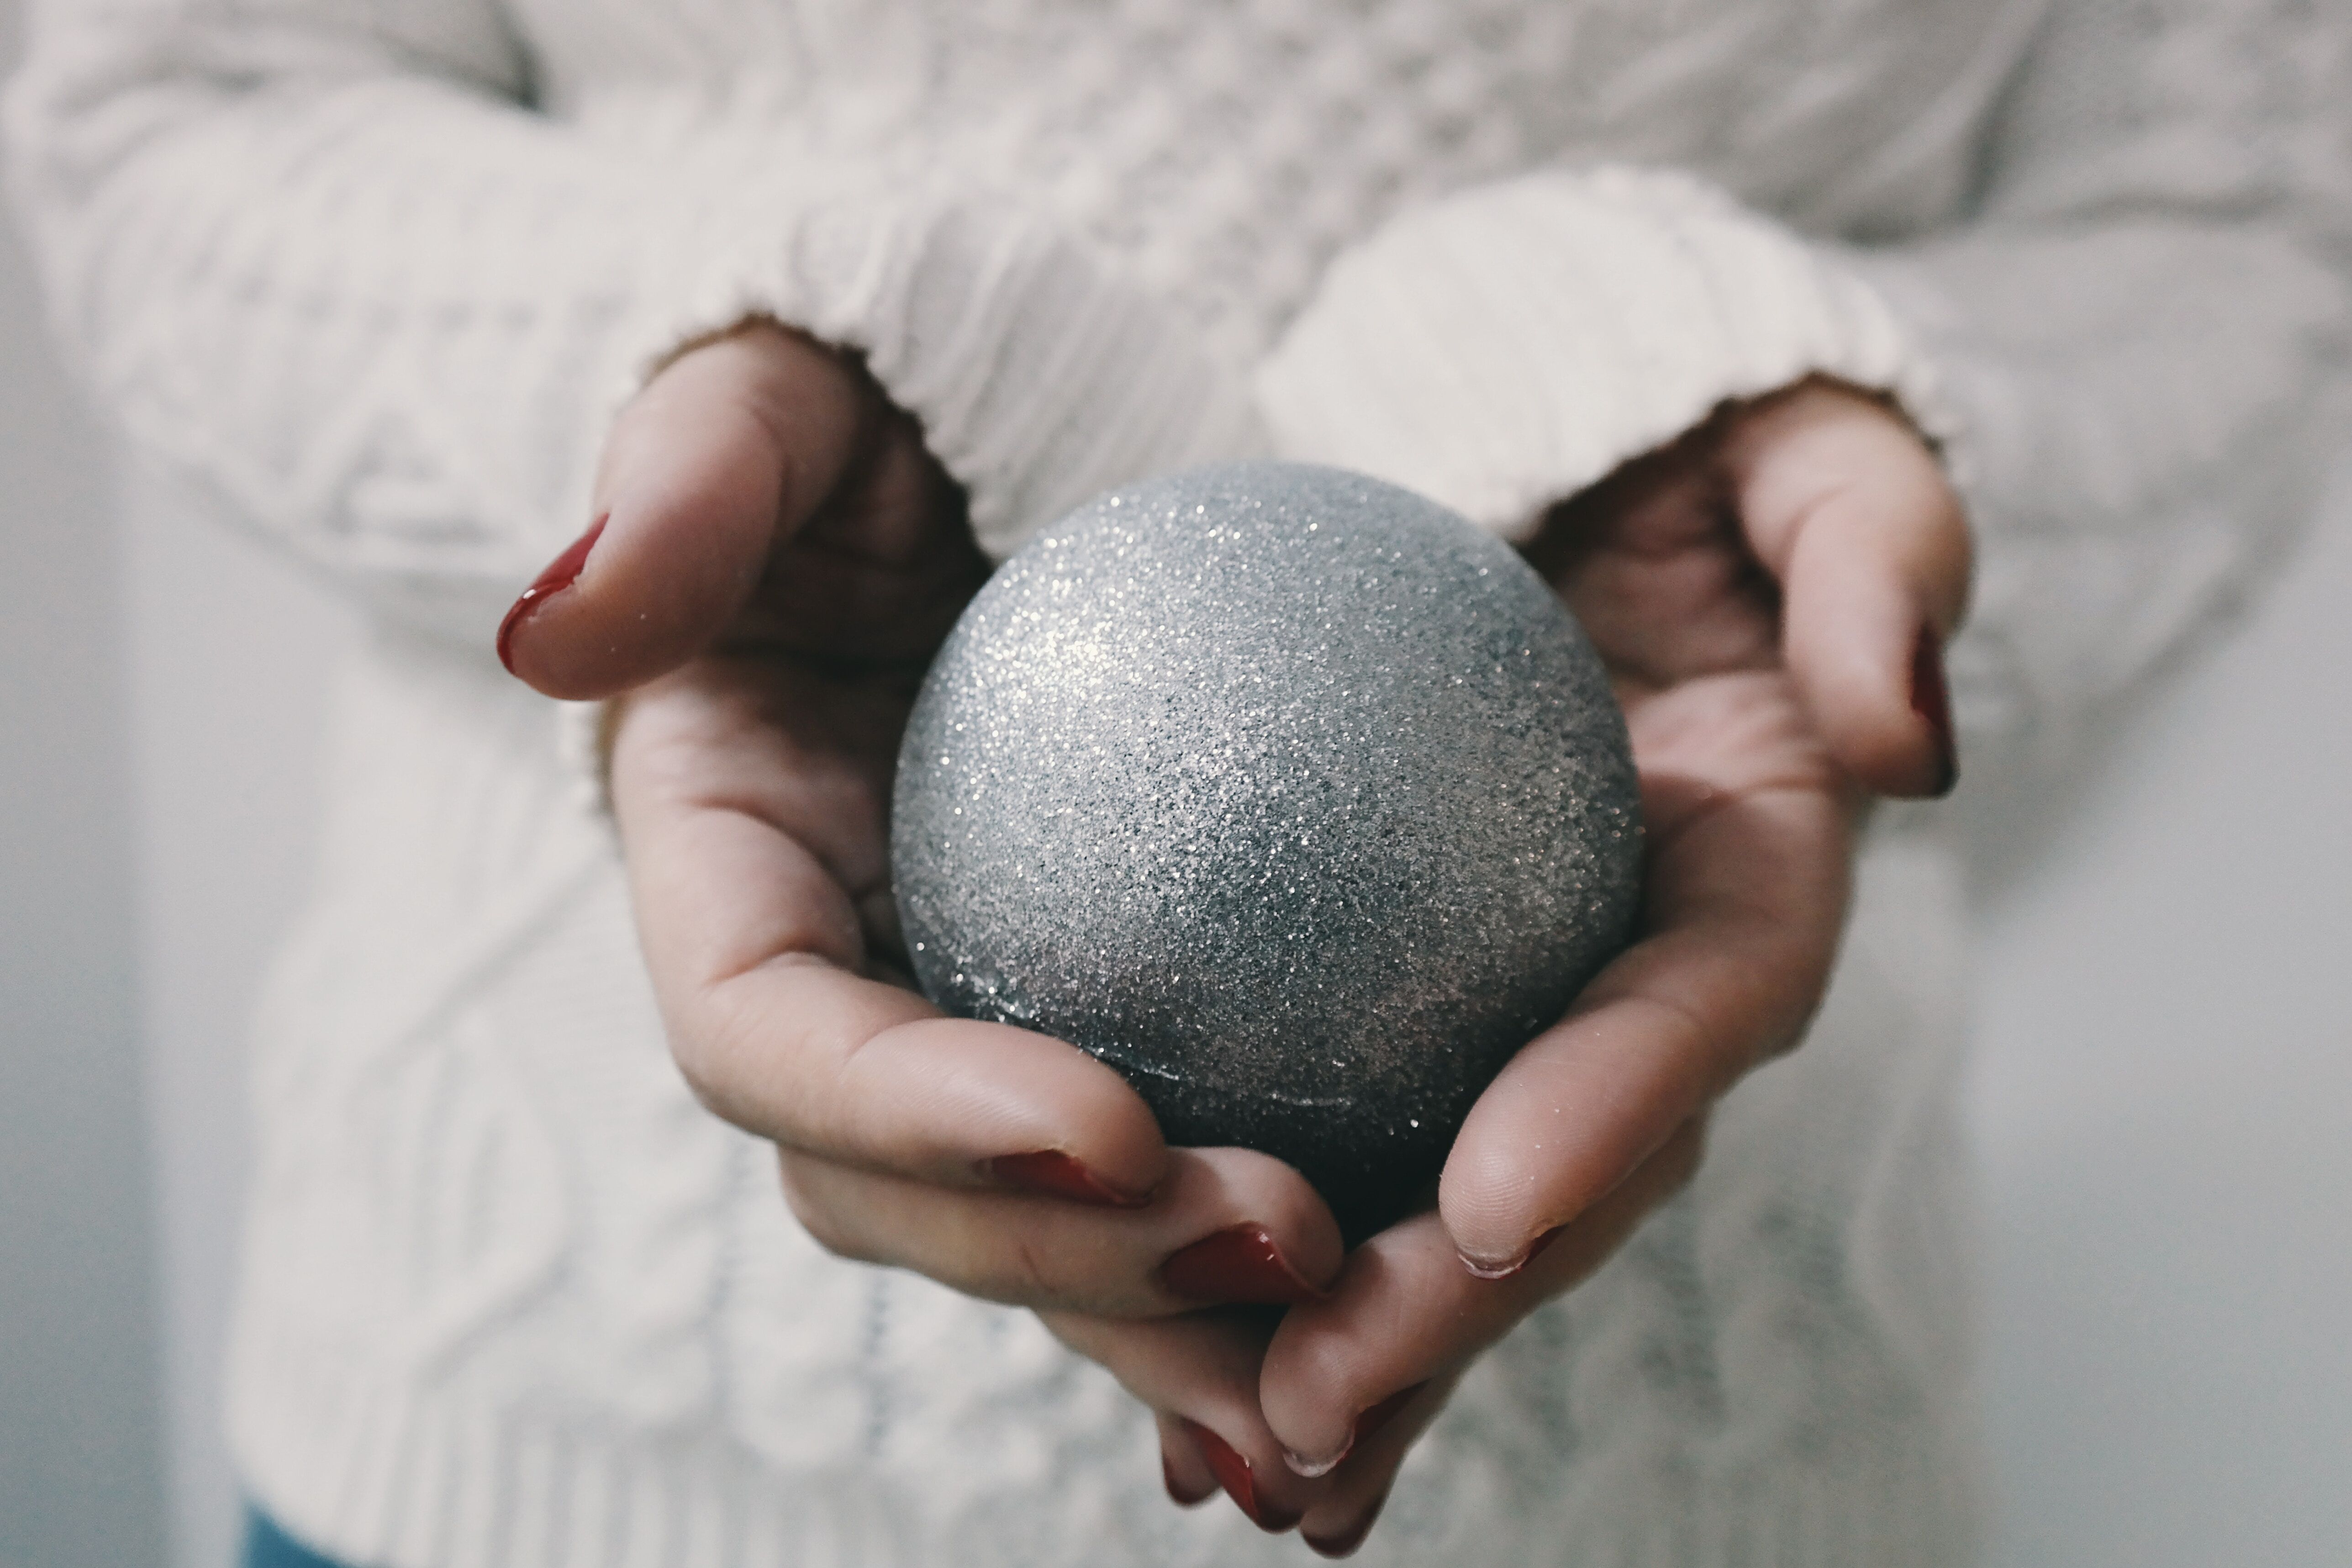 5150x3433 #Free picture, #grey ball, #christmas, #hand, #sparkle, #nail, #christmas jumper, #wallpaper, #christmas wallpaper, #snowball, #holding, #christmas background, #christmasy, #ball, #decoration, #lady, # grey, #hands, #woman, #female